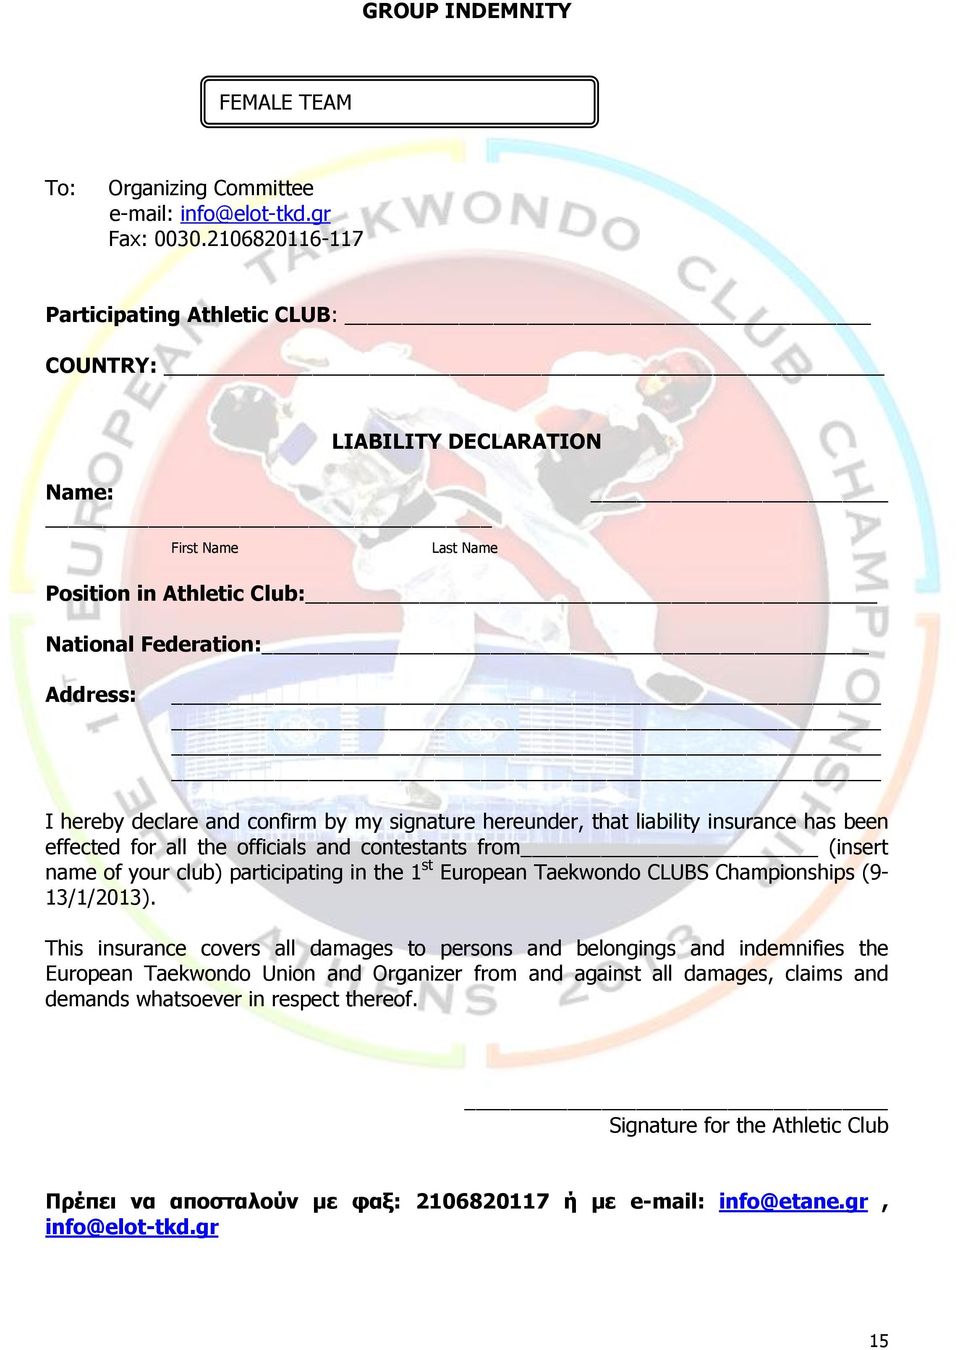 signature hereunder, that liability insurance has been effected for all the officials and contestants from (insert name of your club) participating in the 1 st European Taekwondo CLUBS Championships